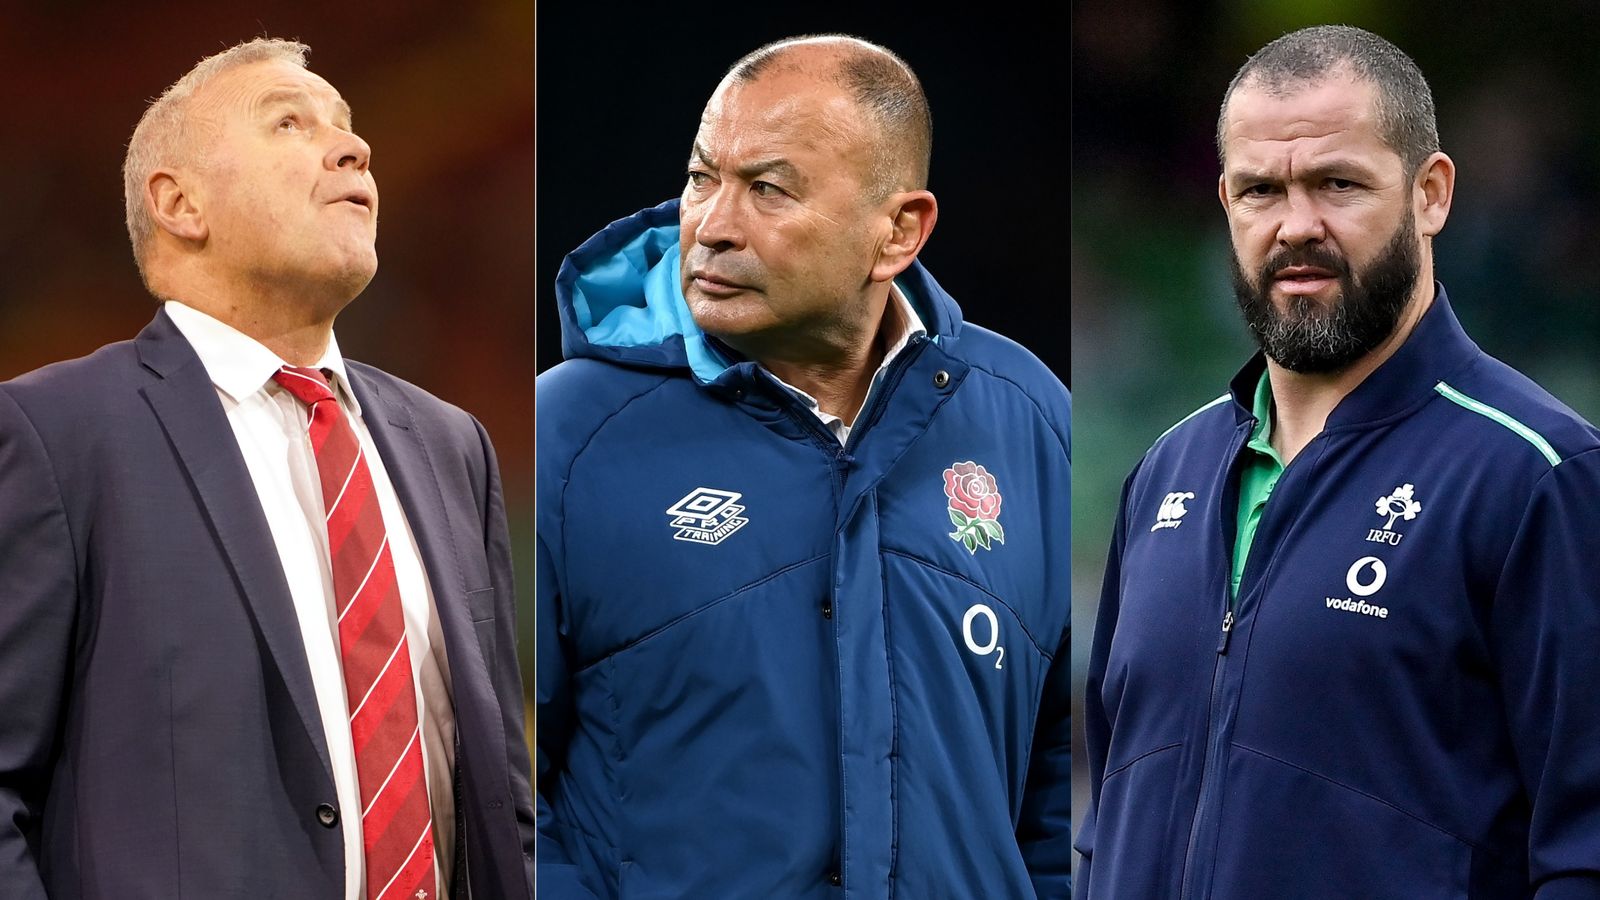 Autumn debrief: Eddie Jones’ England floundering, Wales’ Wayne Pivac on the way out? Andy Farrell’s Ireland building